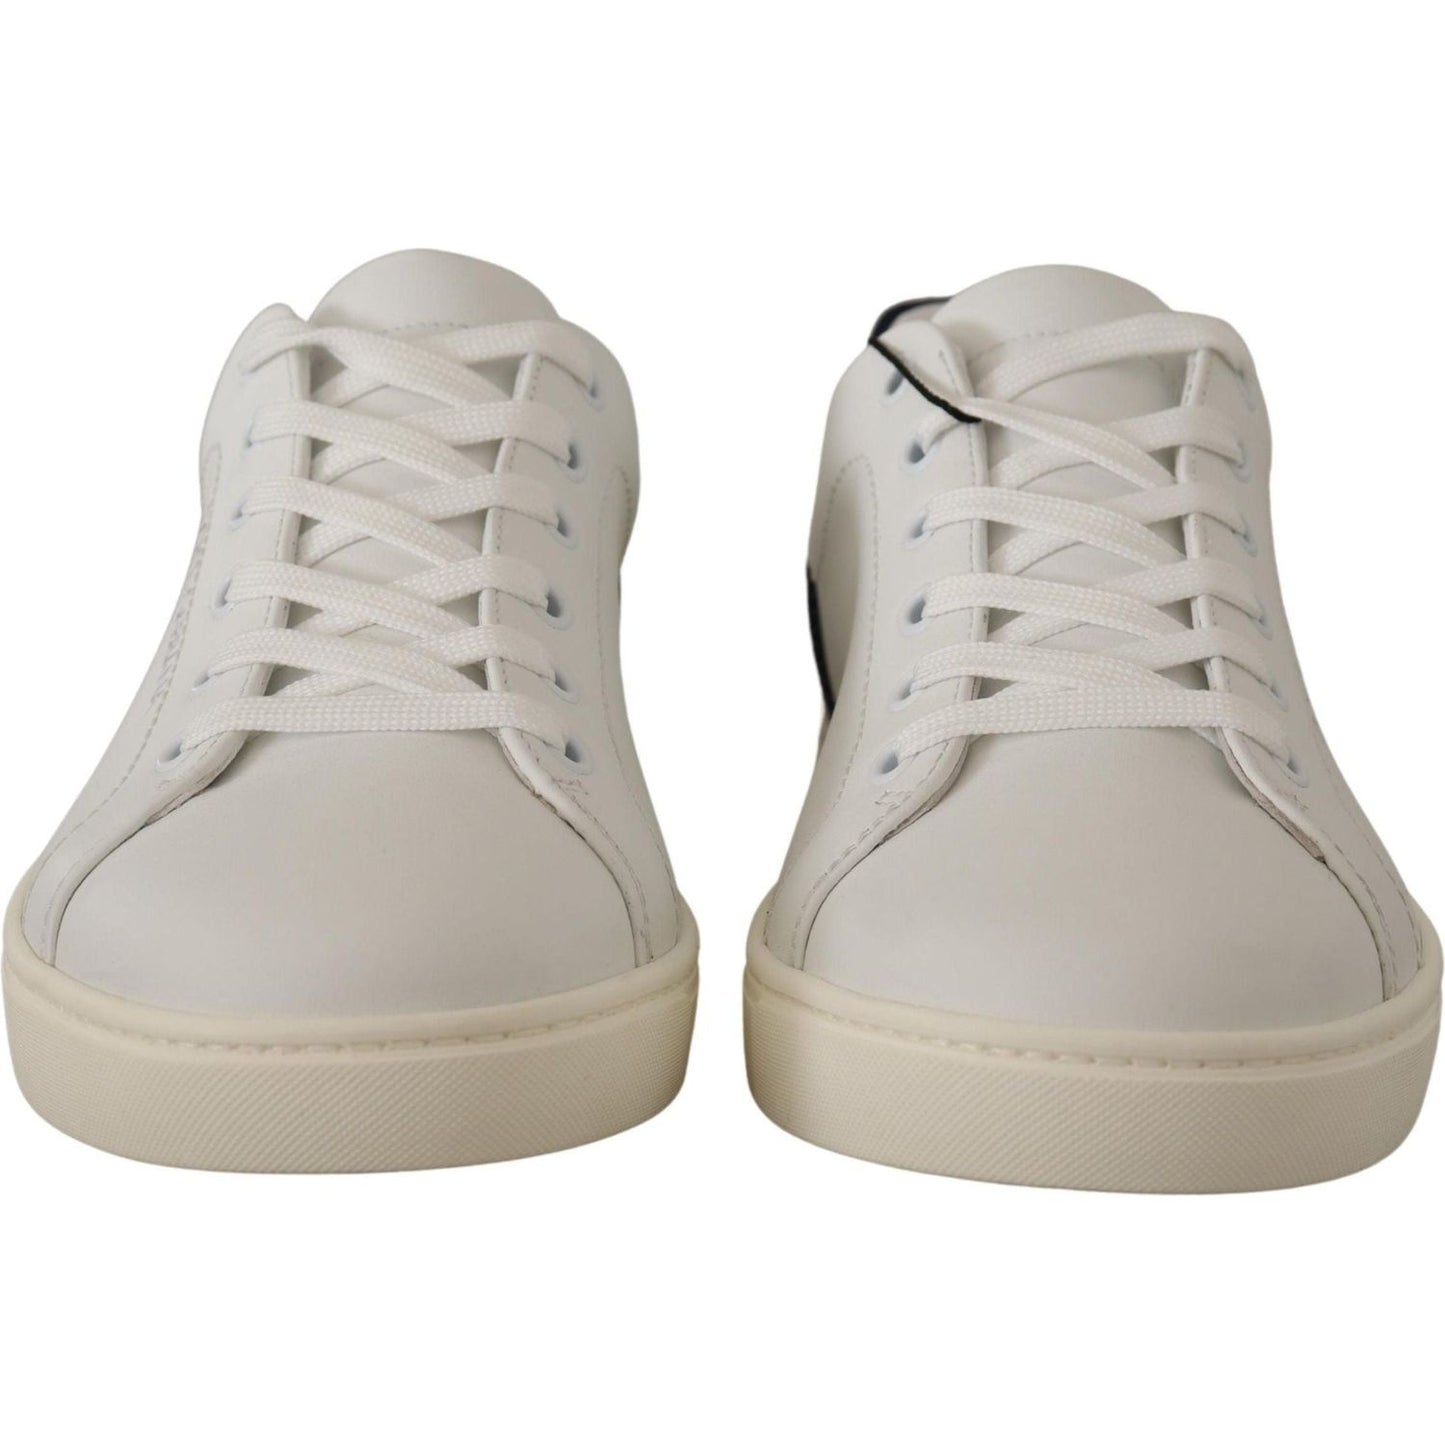 Dolce & Gabbana | White Blue Leather Low Top Sneakers  | McRichard Designer Brands